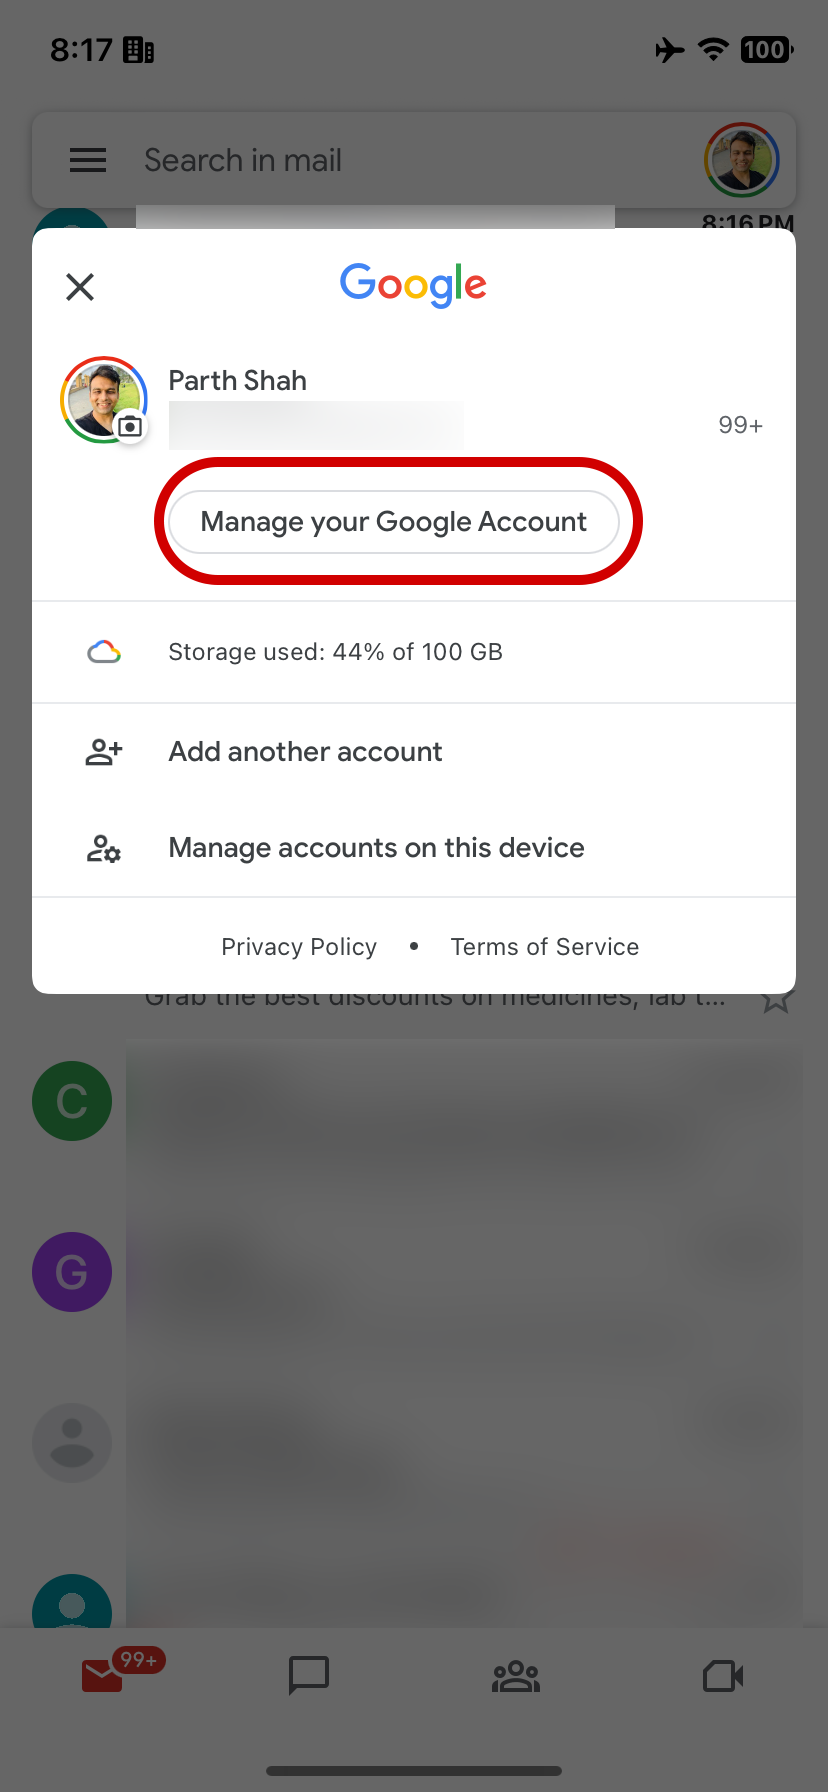 Managing your Google account on iOS 